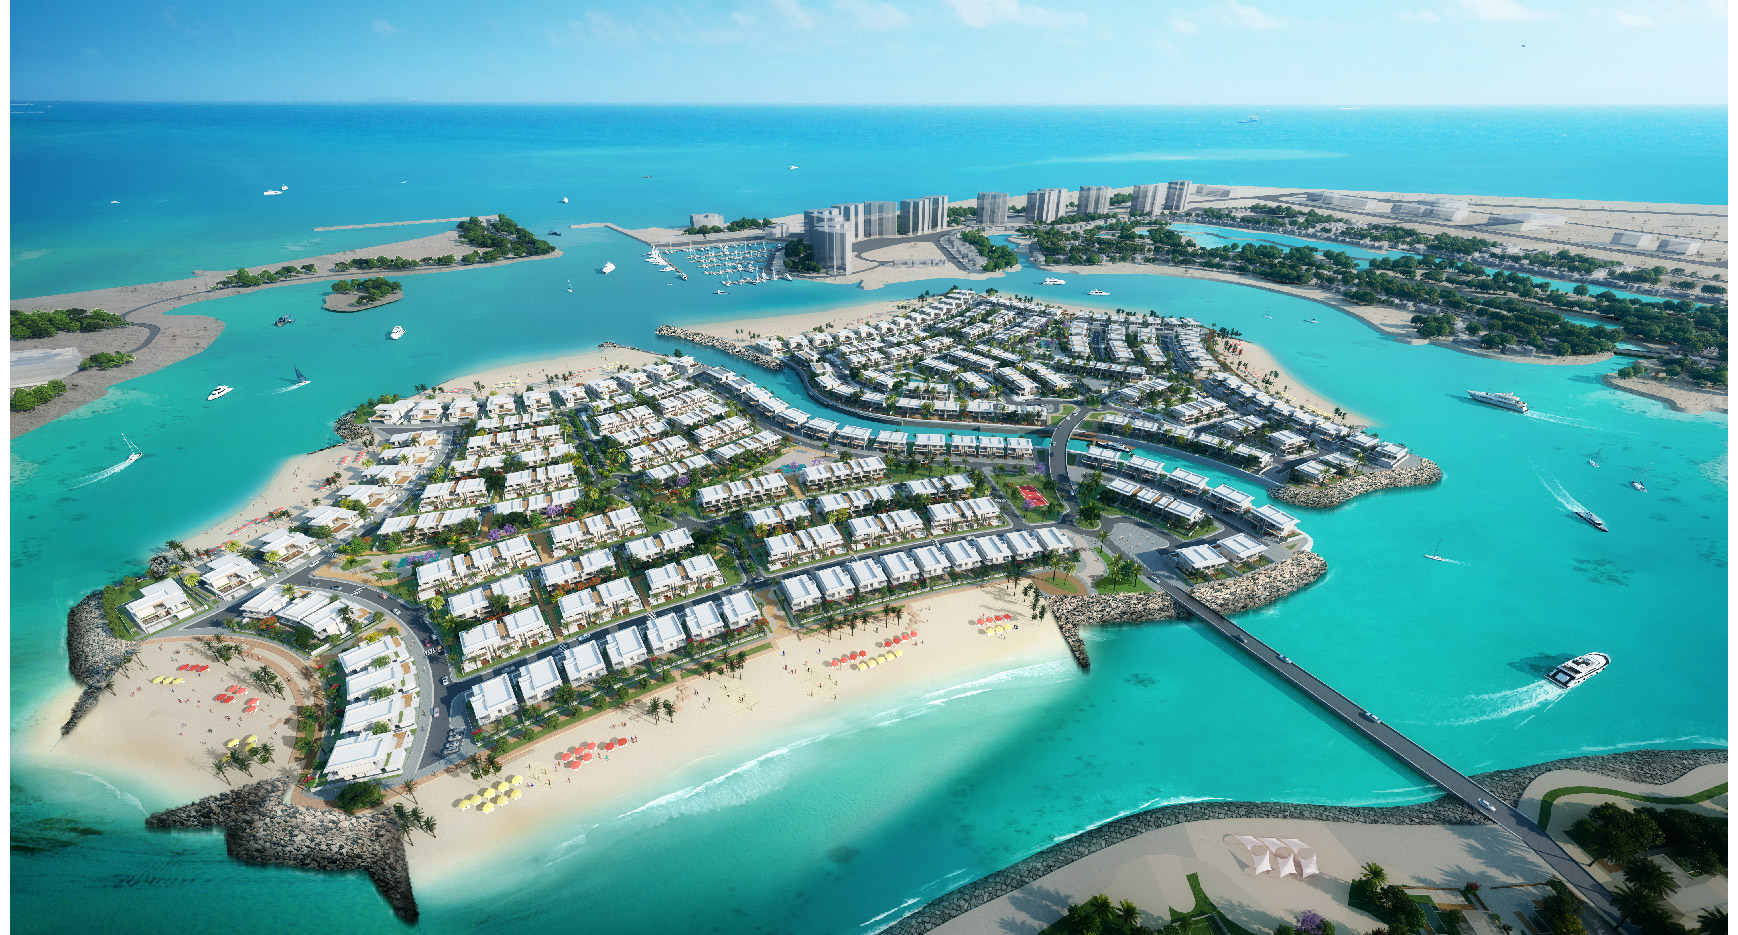 Falcon Island by Al Hamra has been listed as one of the UAE's 30 megaprojects of 2022 